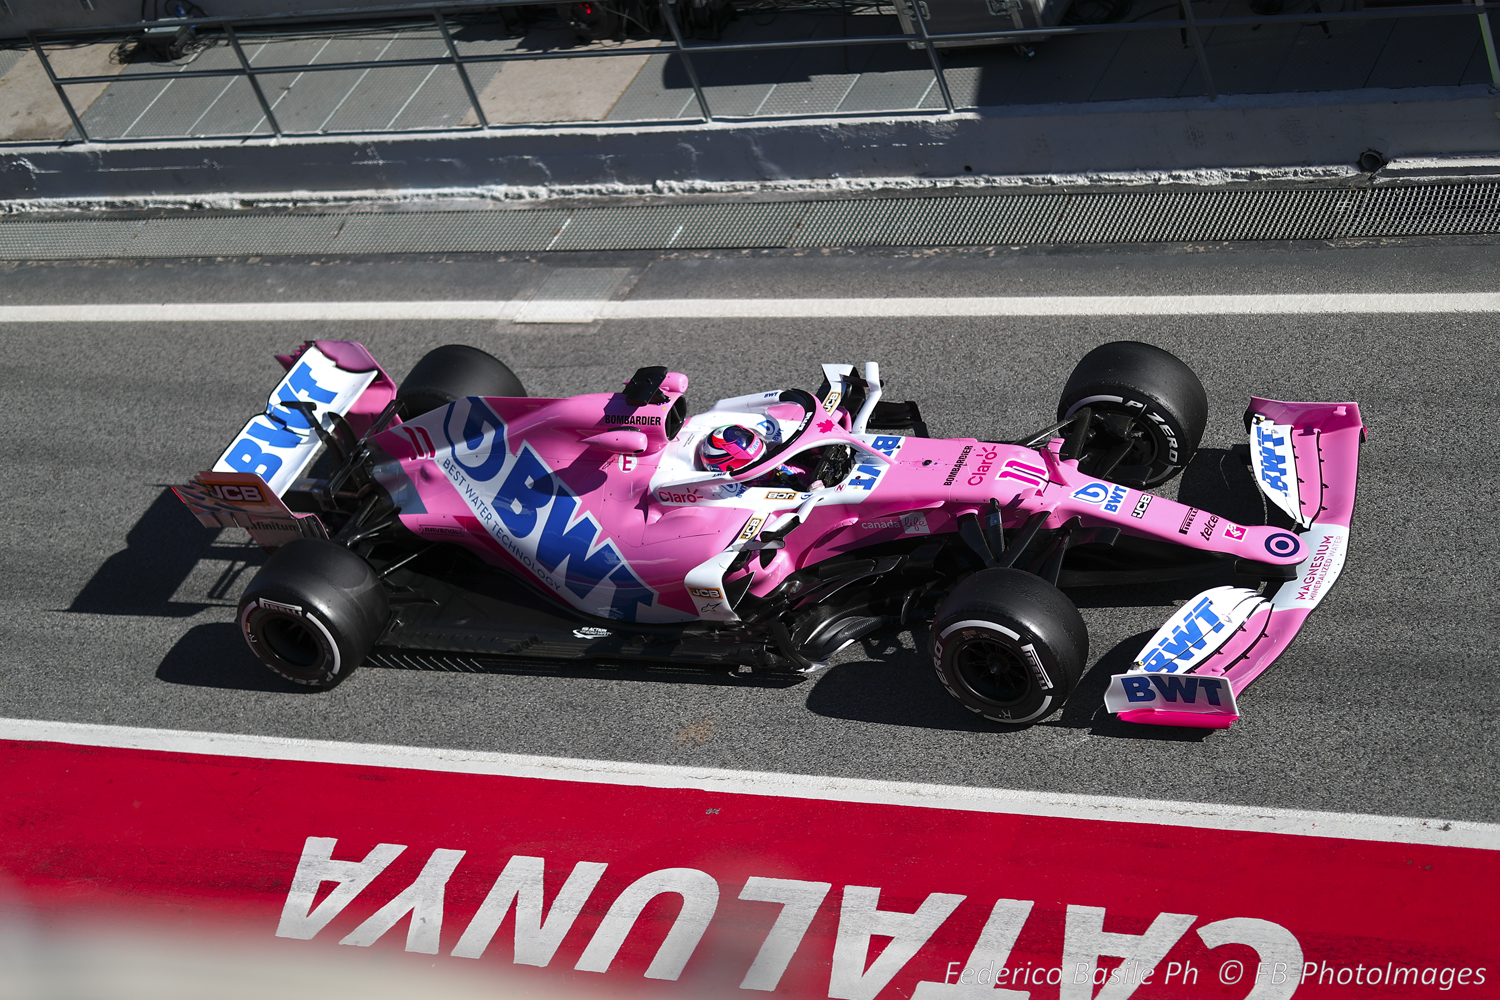 McLaren does not plan to buy last year's Mercedes design plans and paint it McLaren orange like Force India did, but in pink